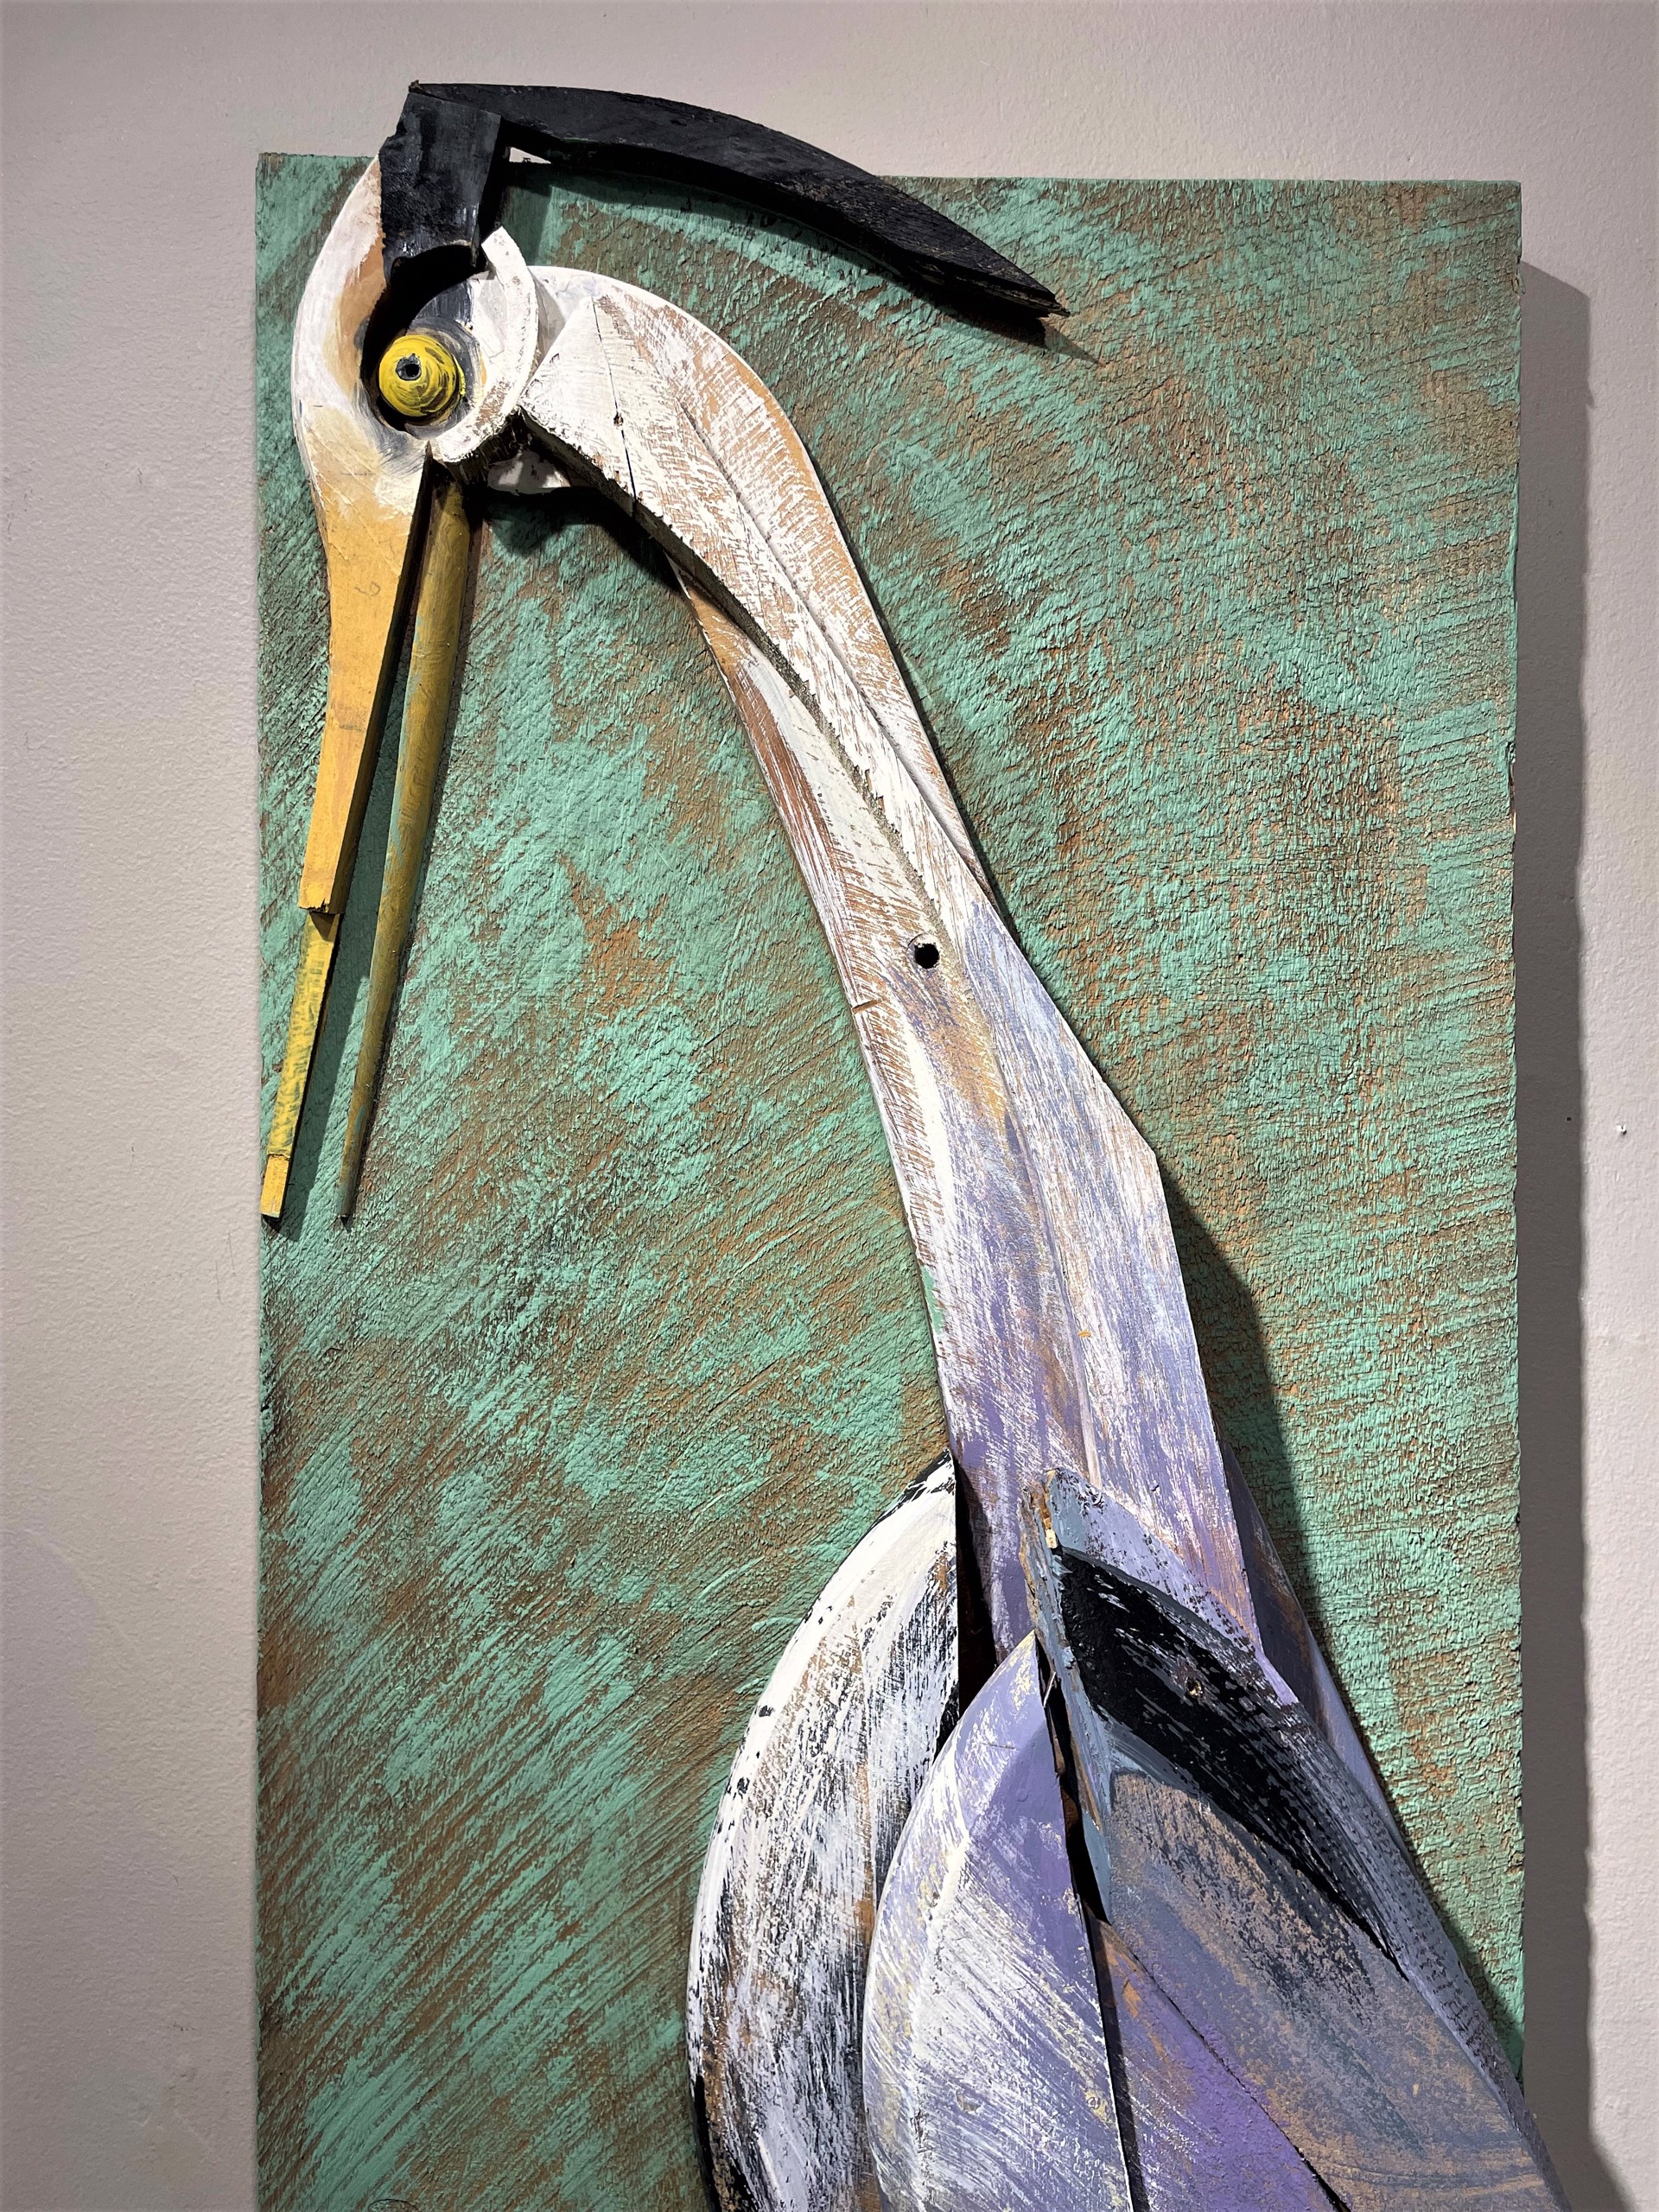 ANKLE DEEP (GREAT BLUE HERON) by ANDRE BENOIT